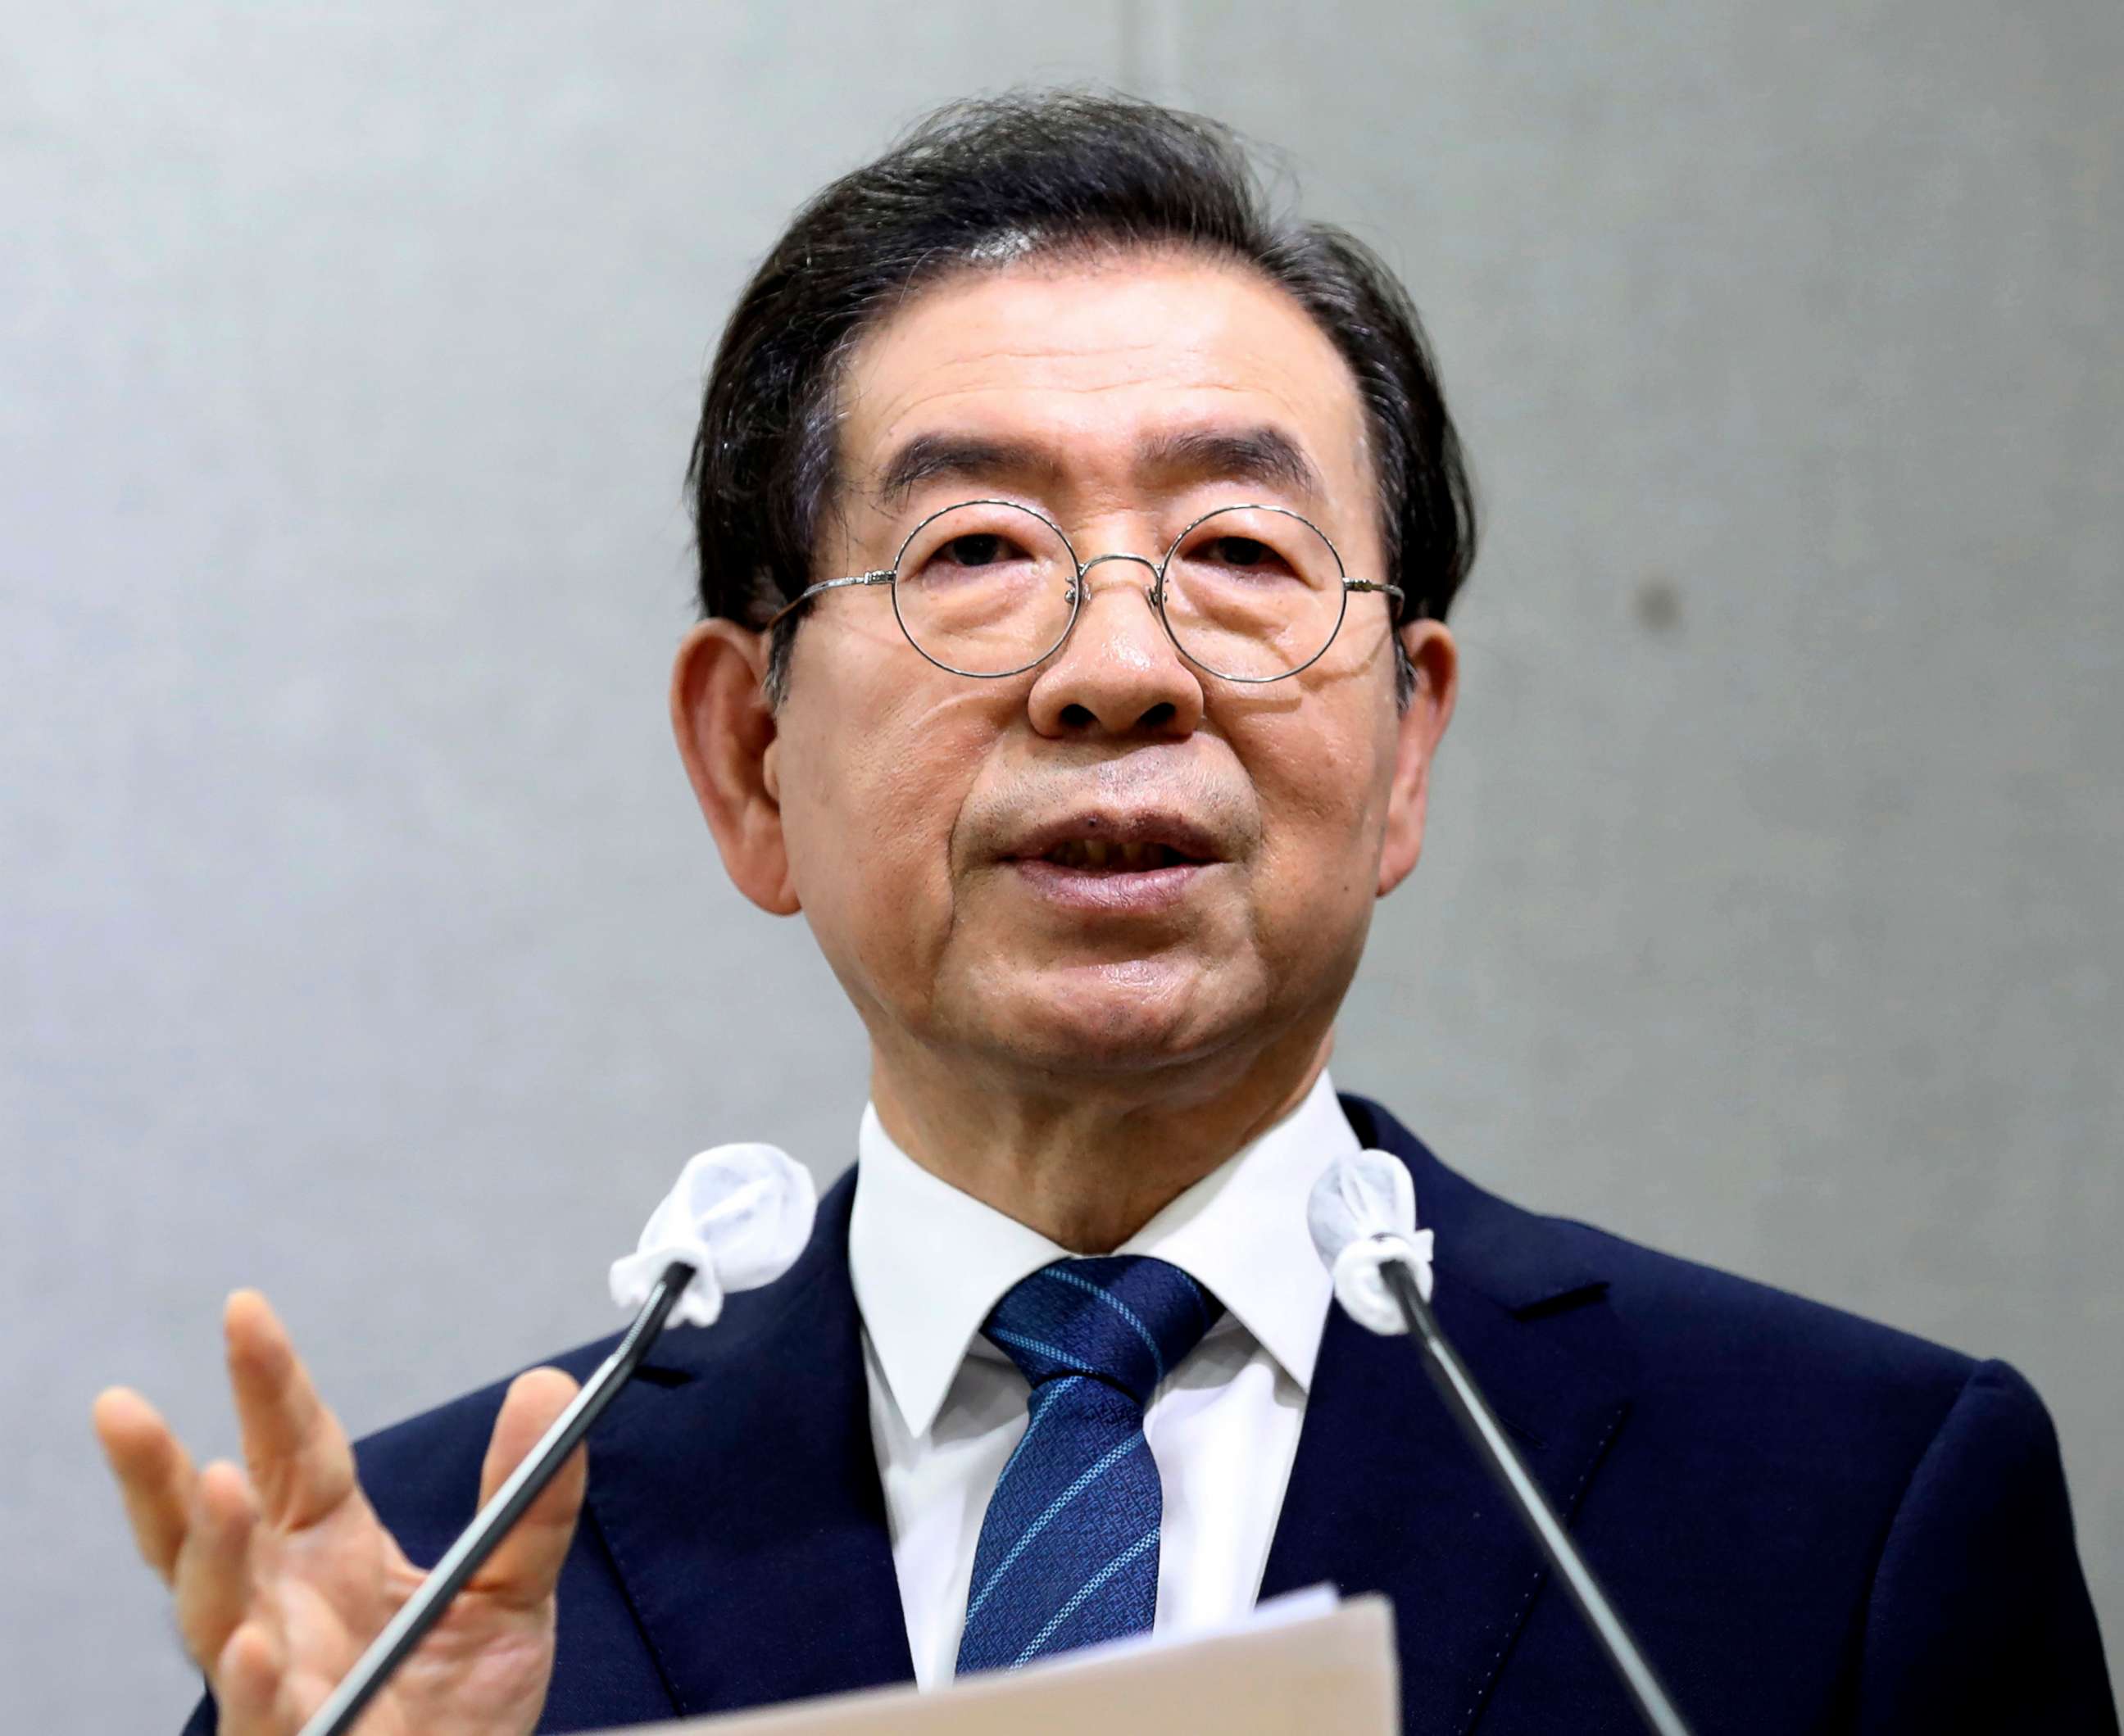 PHOTO: Seoul Mayor Park Won-soon speaks during a press conference at Seoul City Hall in Seoul, July 8, 2020.